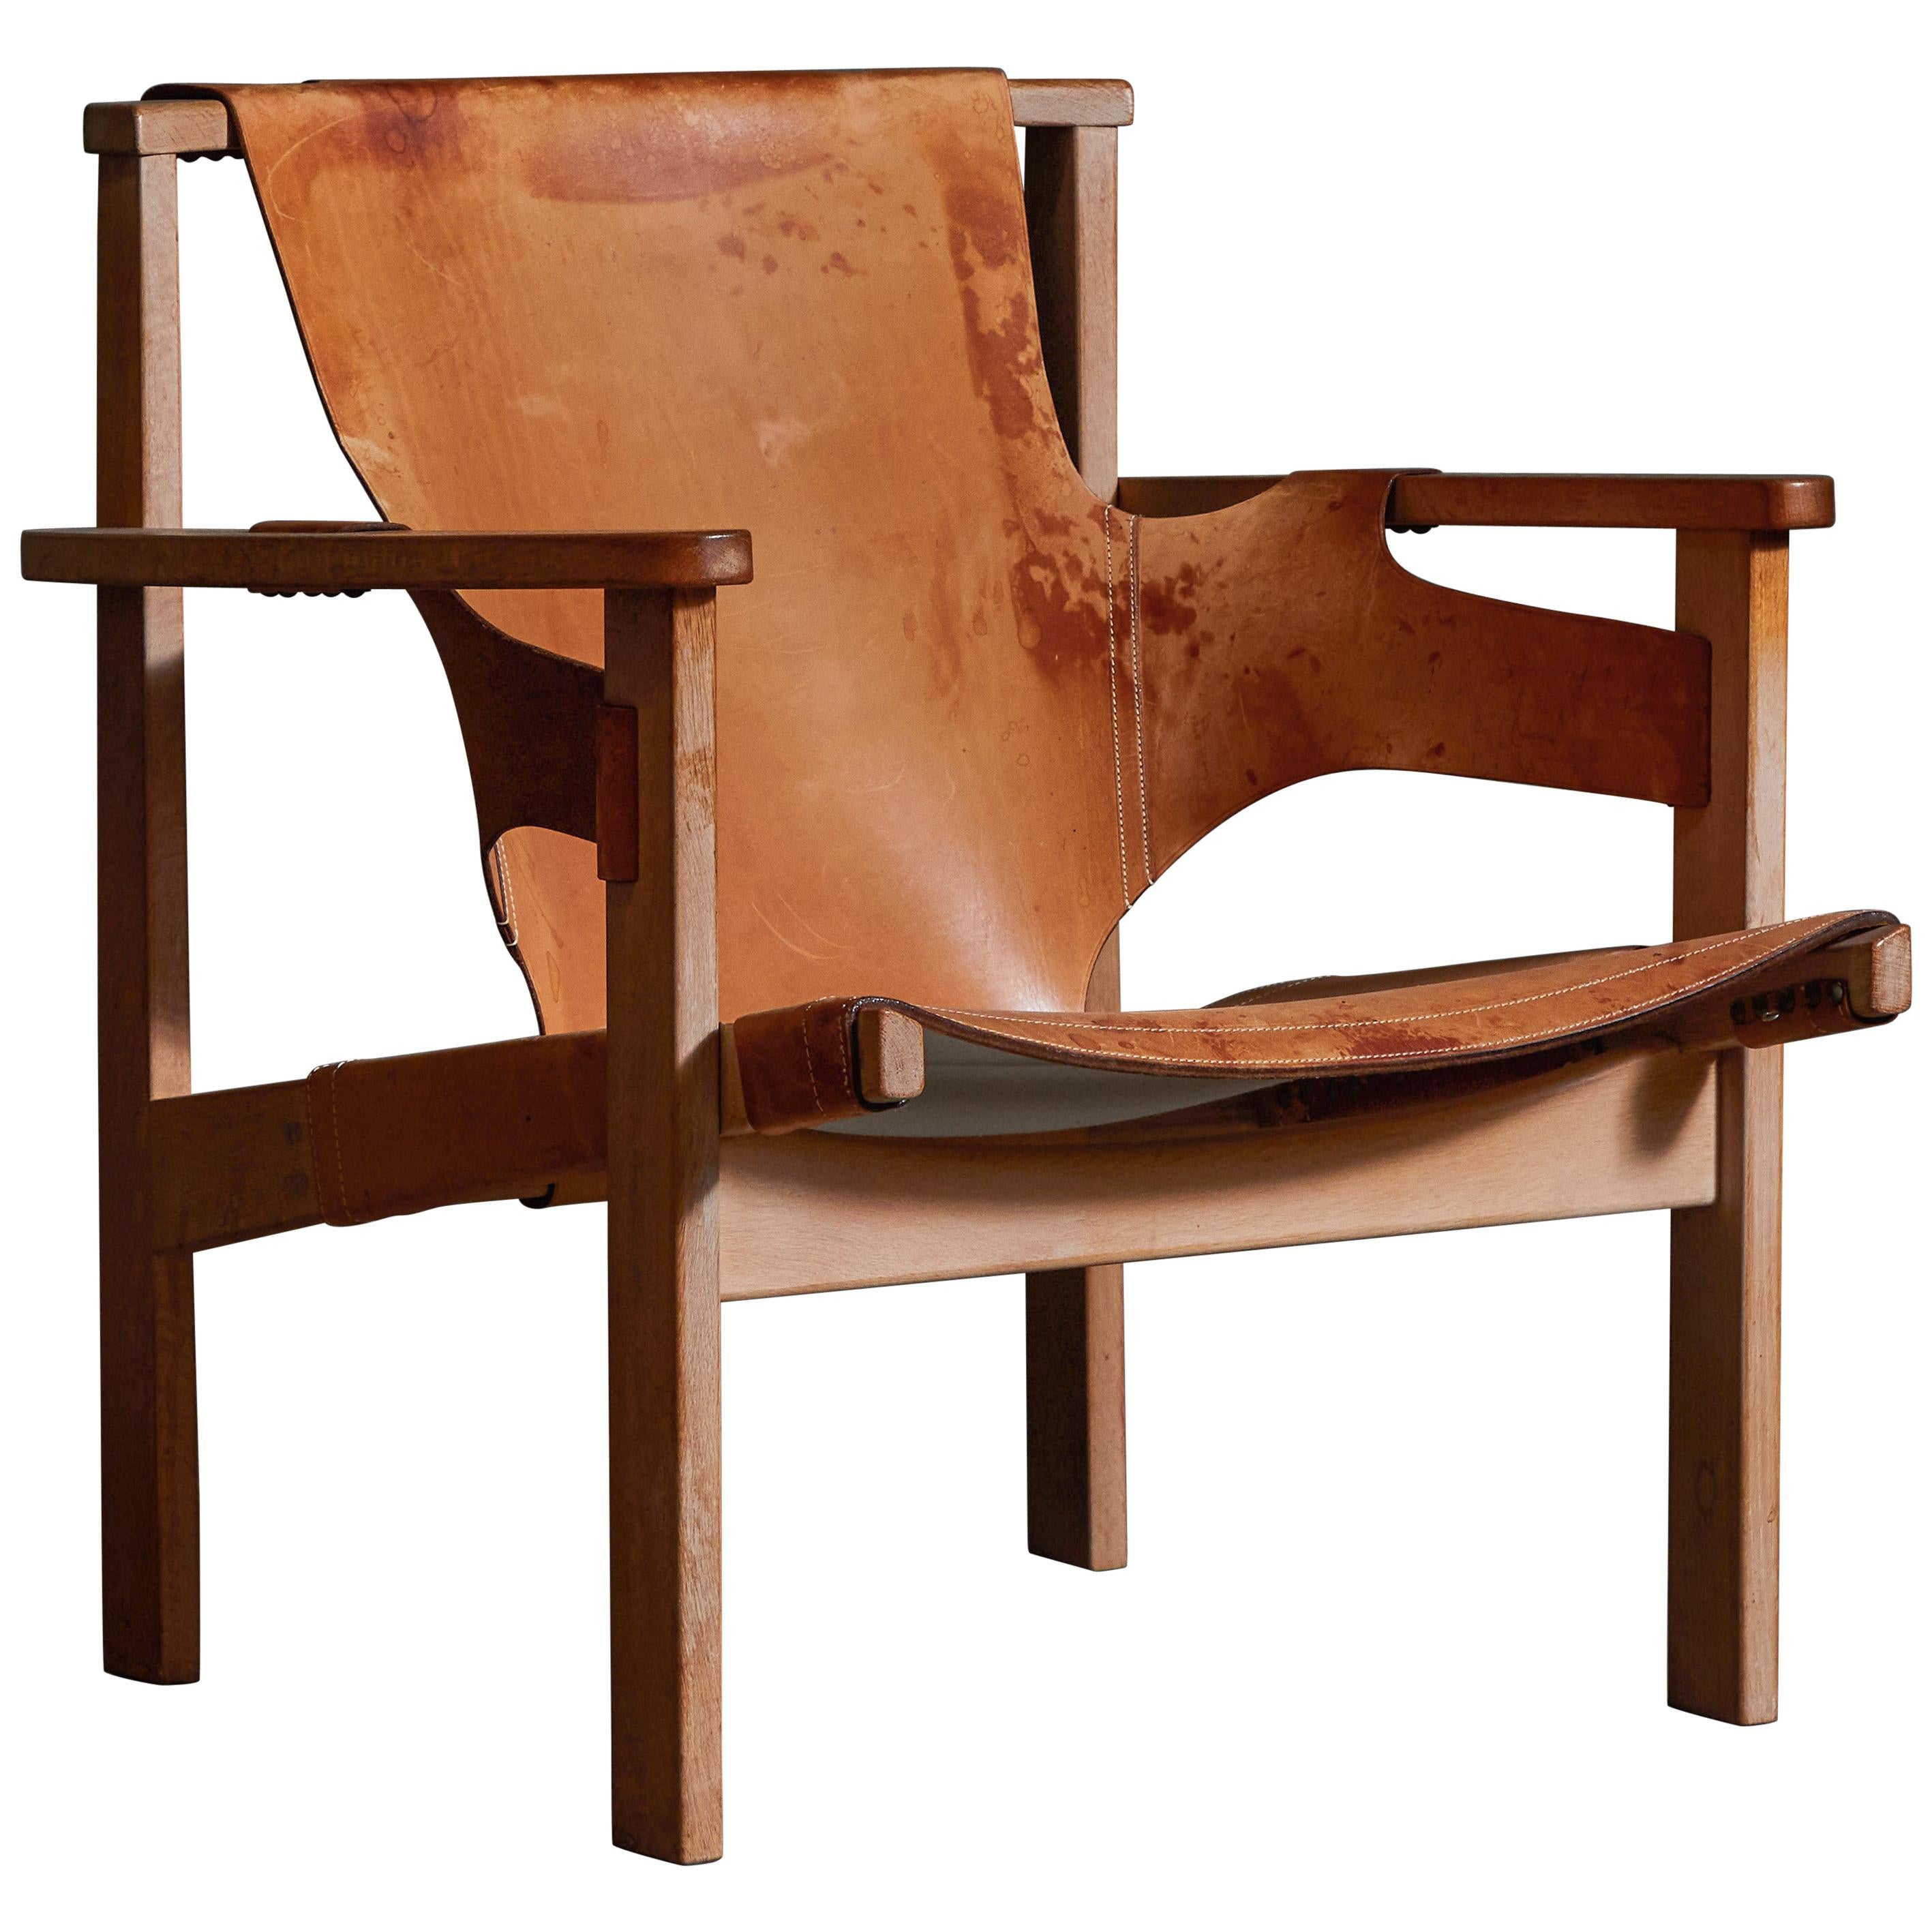 Patinated Leather "Trienna" Lounge Chair by Carl-Axel Acking